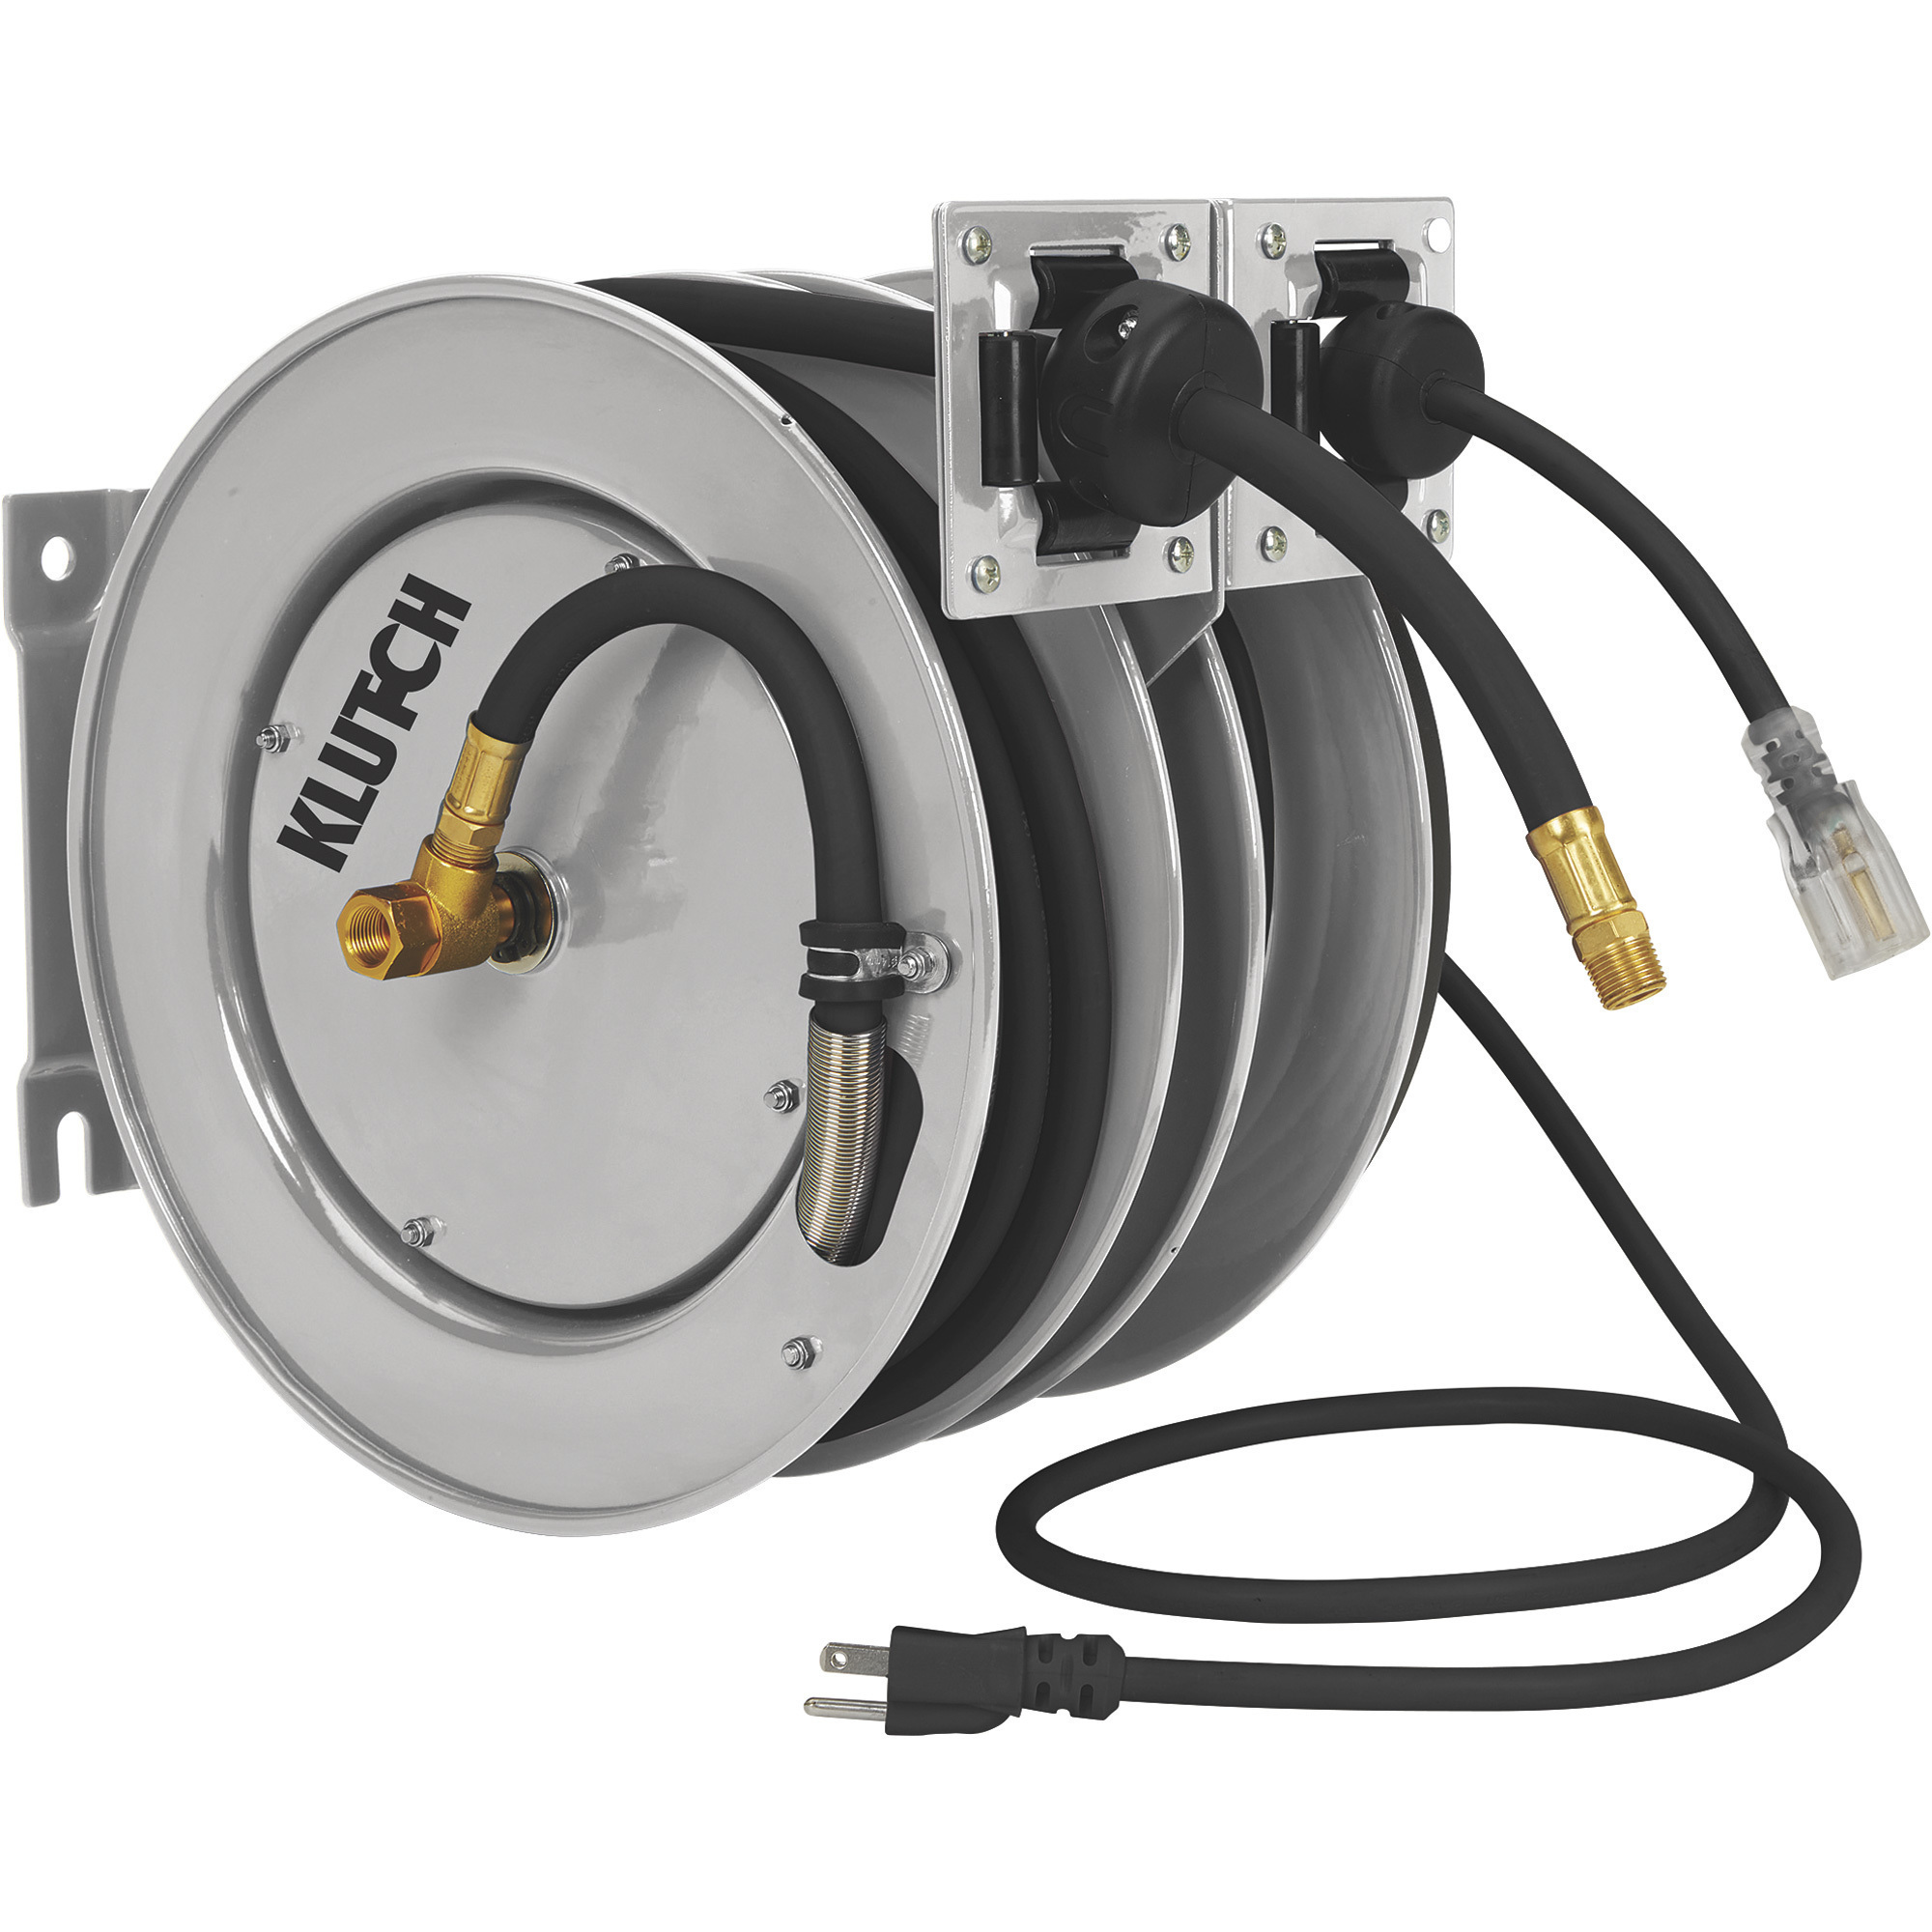 Klutch Combo Air and Electric Hose Reel